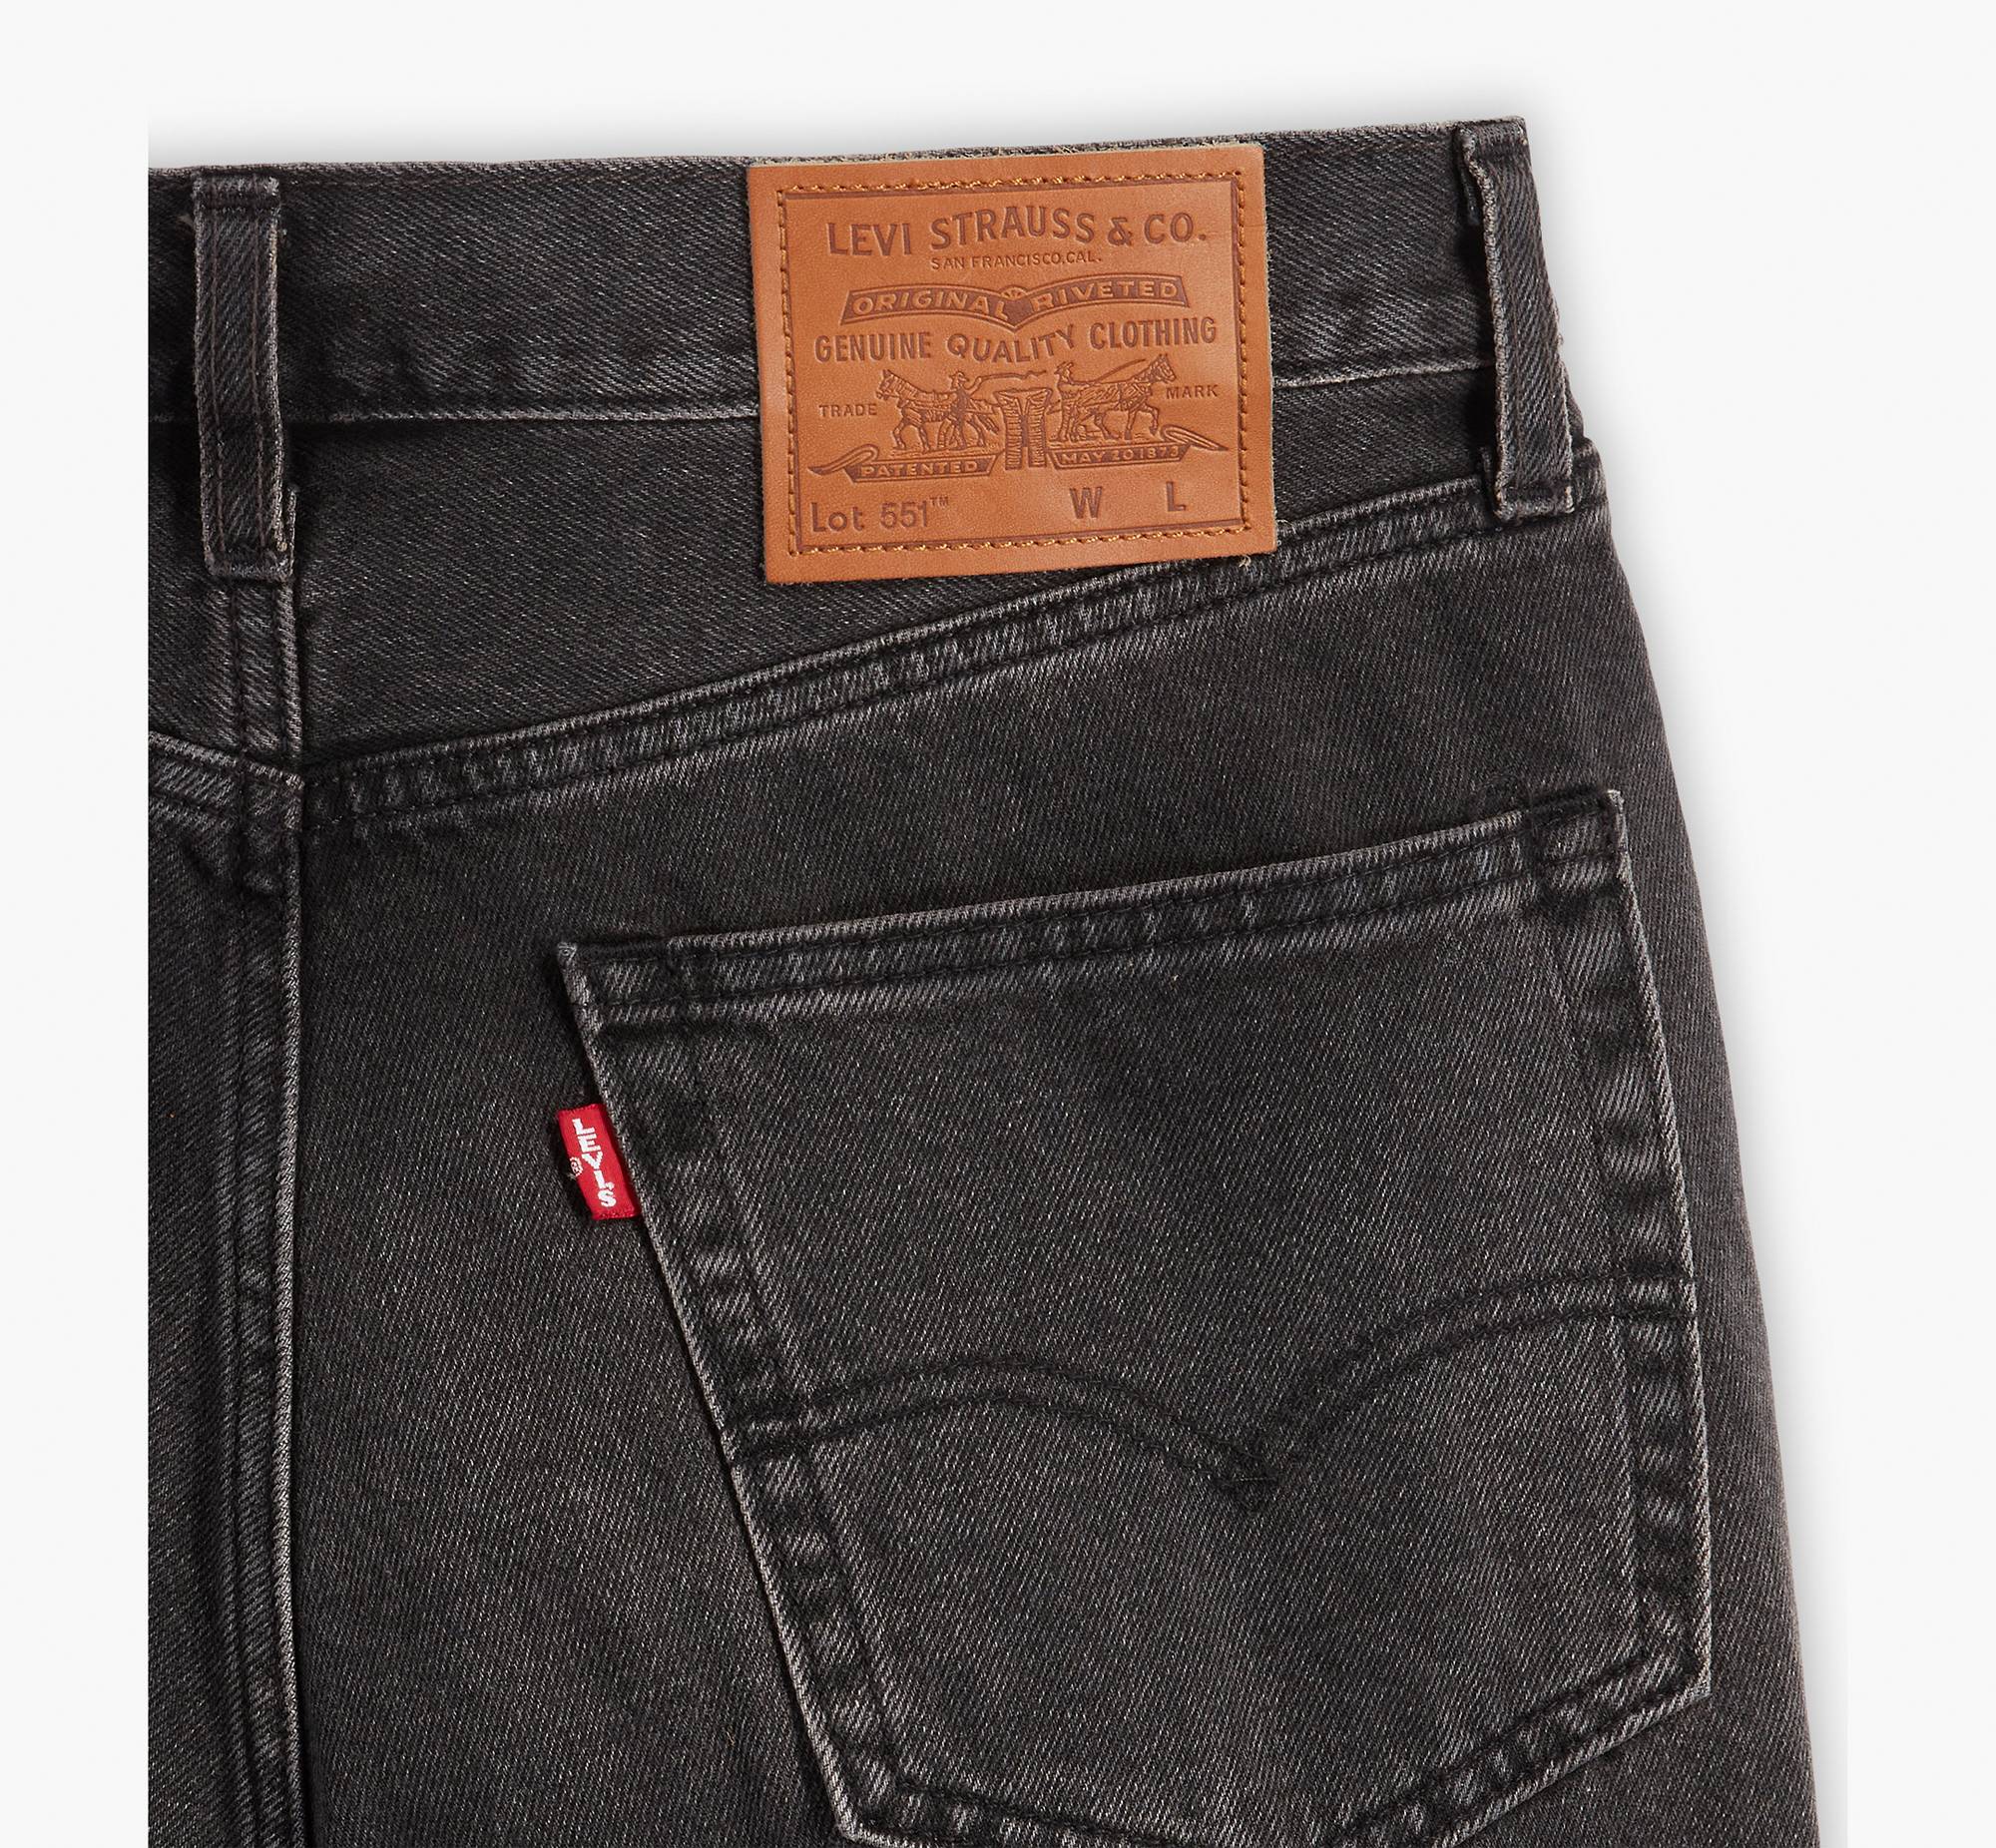 551Z™ Authentic Straight Jeans 8